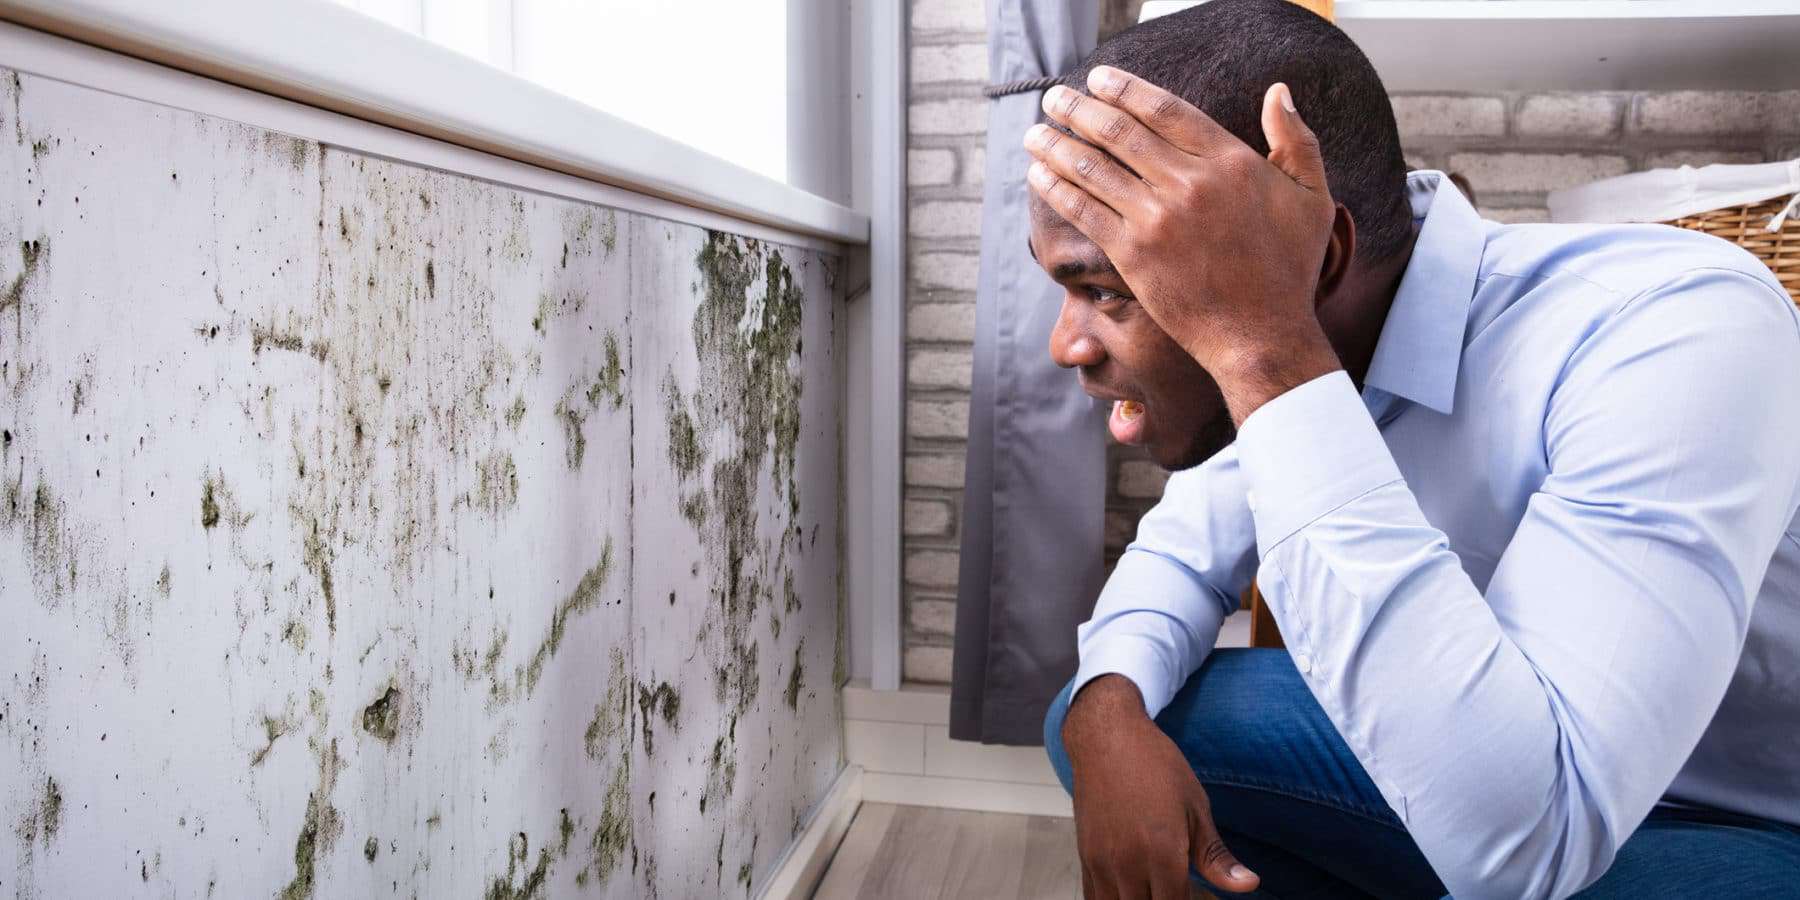 Side View Of A Shocked Young Man Looking At Mold and Mildew On Wall